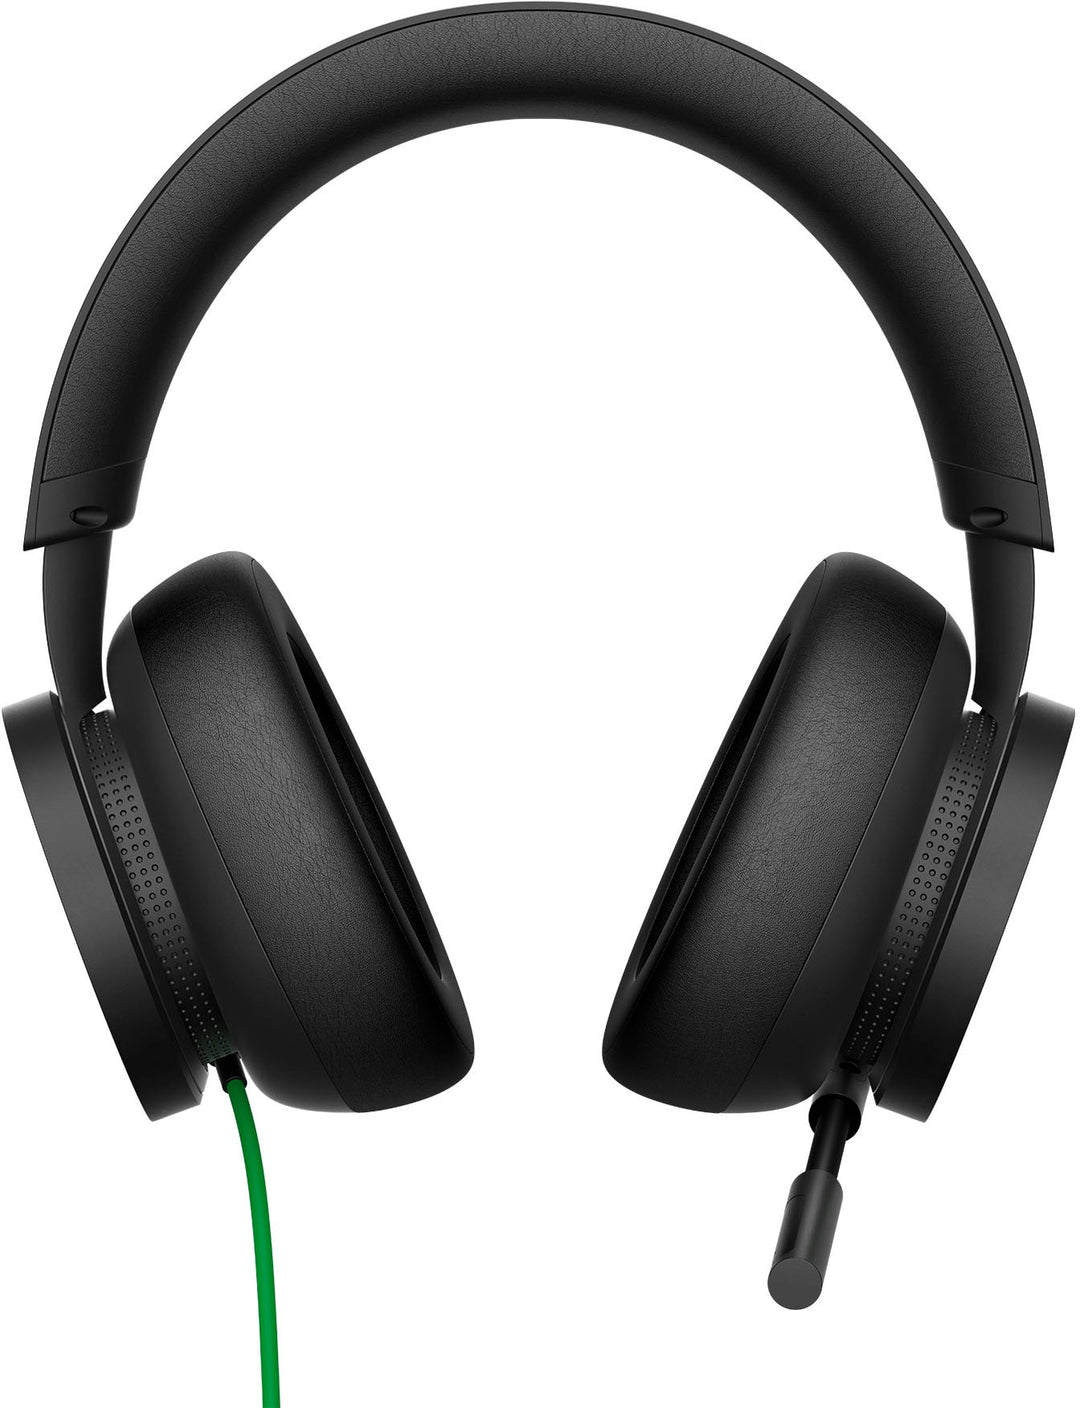 Microsoft - Xbox Stereo Headset for Xbox Series X|S, Xbox One, and Windows 10/11 Devices - Black_5